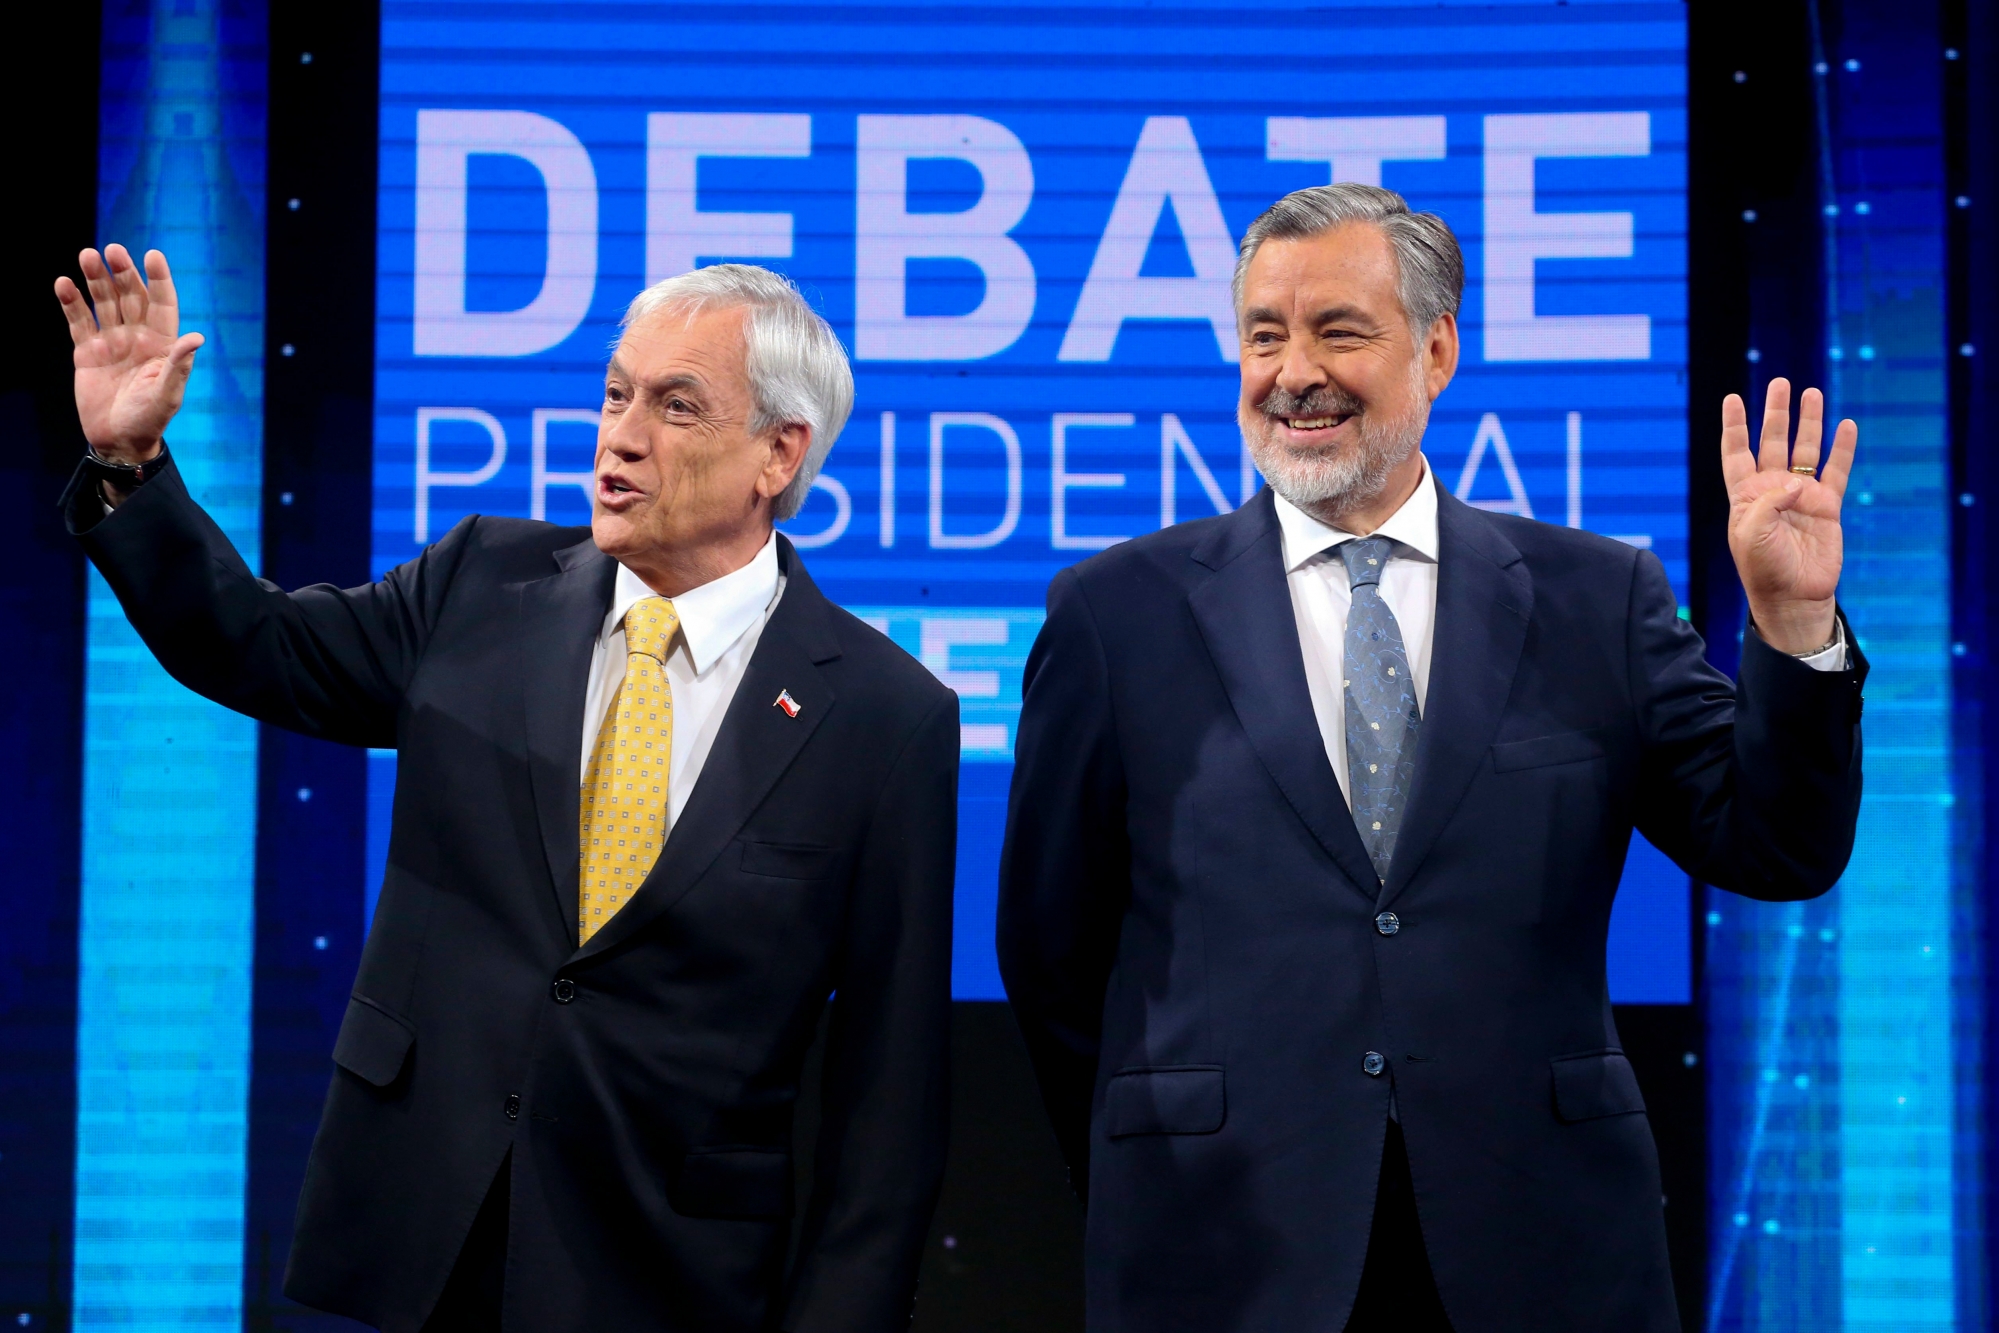 In this Dec. 11, 2017 photo, Chile Vamos candidate and former President Sebastian Pinera, left, and Nueva Mayoria or New Majority ruling party candidate Alejandro Guillier, pose for photos before the start of a live, televised presidential debate, in Santiago, Chile. The presidential run-off election on Dec. 17 is expected to be a tight contest between Pinera and Guillier. (AP Photo/Esteban Felix) Chile Elections